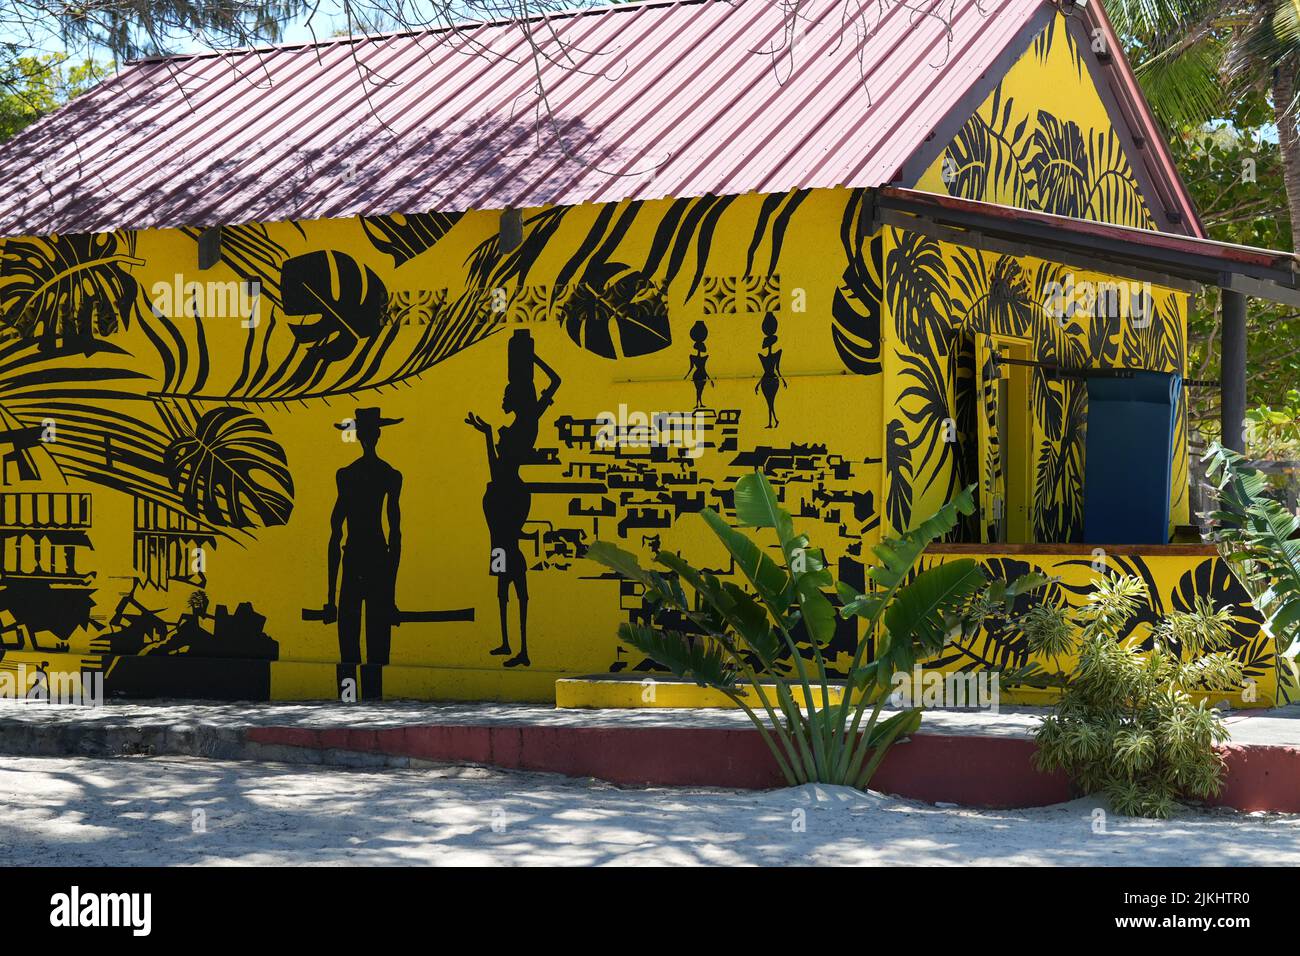 A private island restroom with cool art on the exterior in Labadee, Haiti Stock Photo